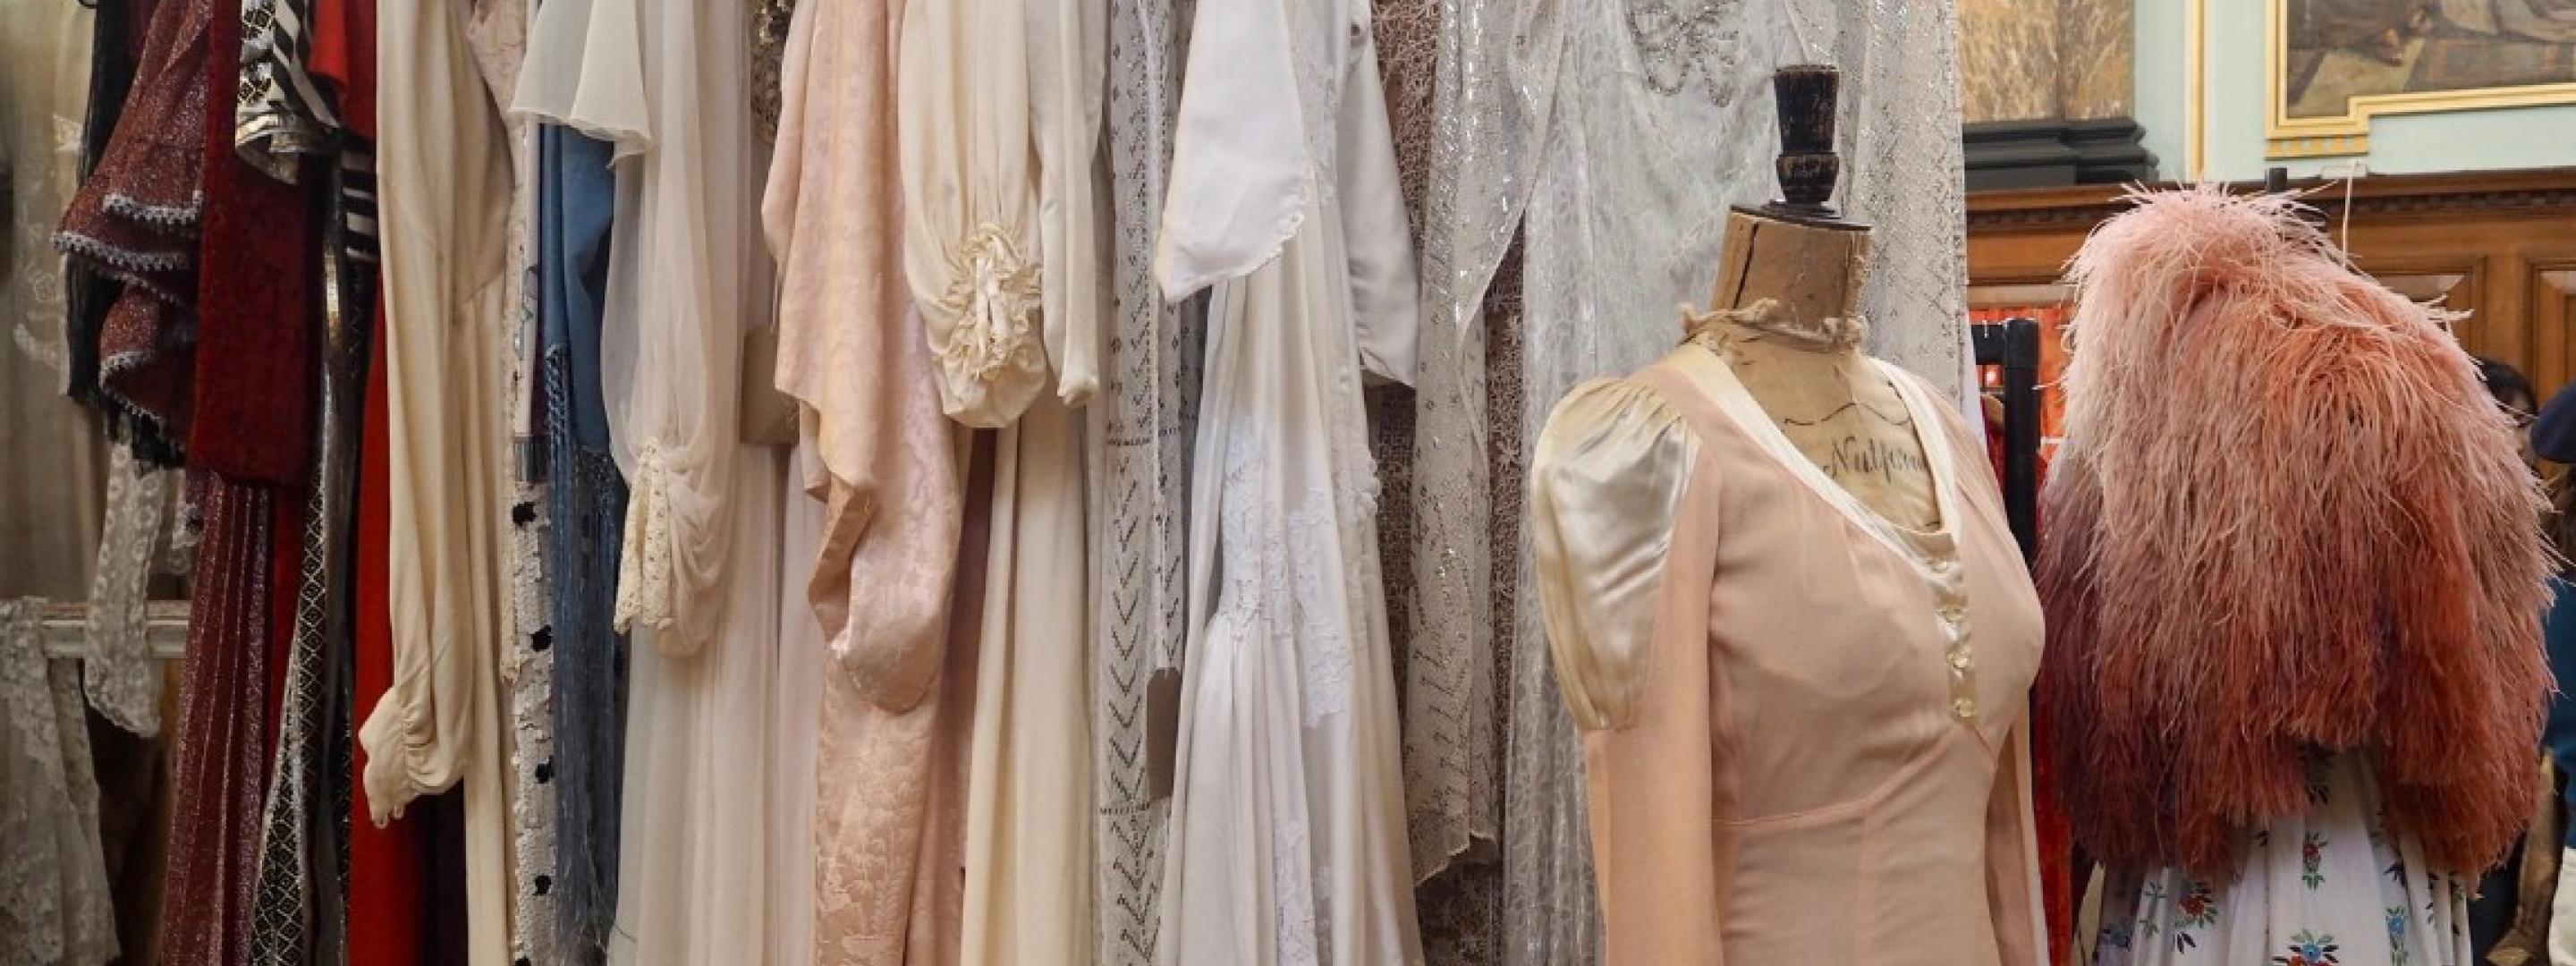 A selection of vintage dresses on a clothes rail